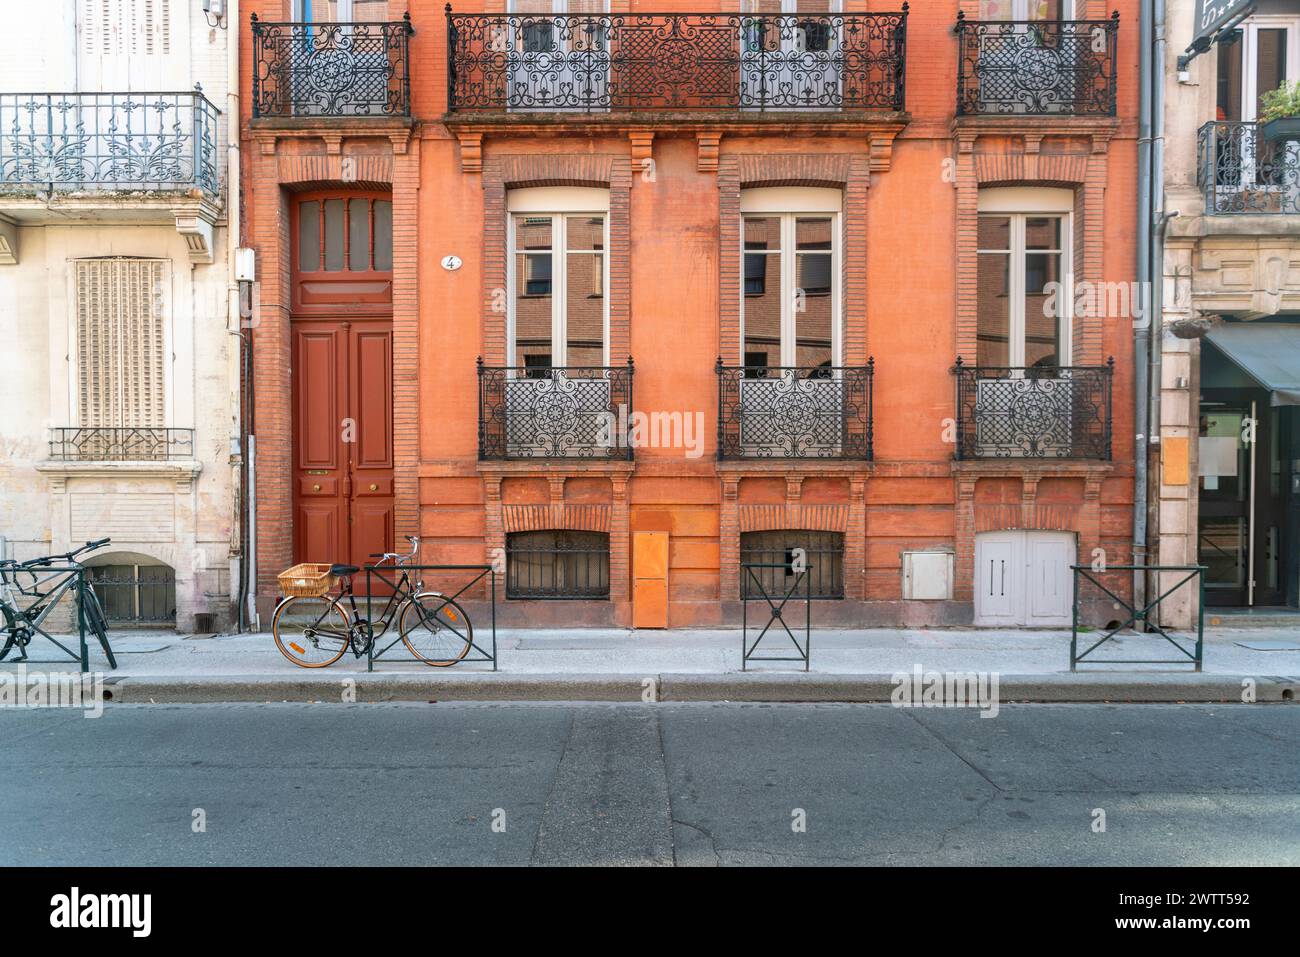 Facade or exterior of historic traditional houses in red or orange in the old city of Toulouse, France Stock Photo